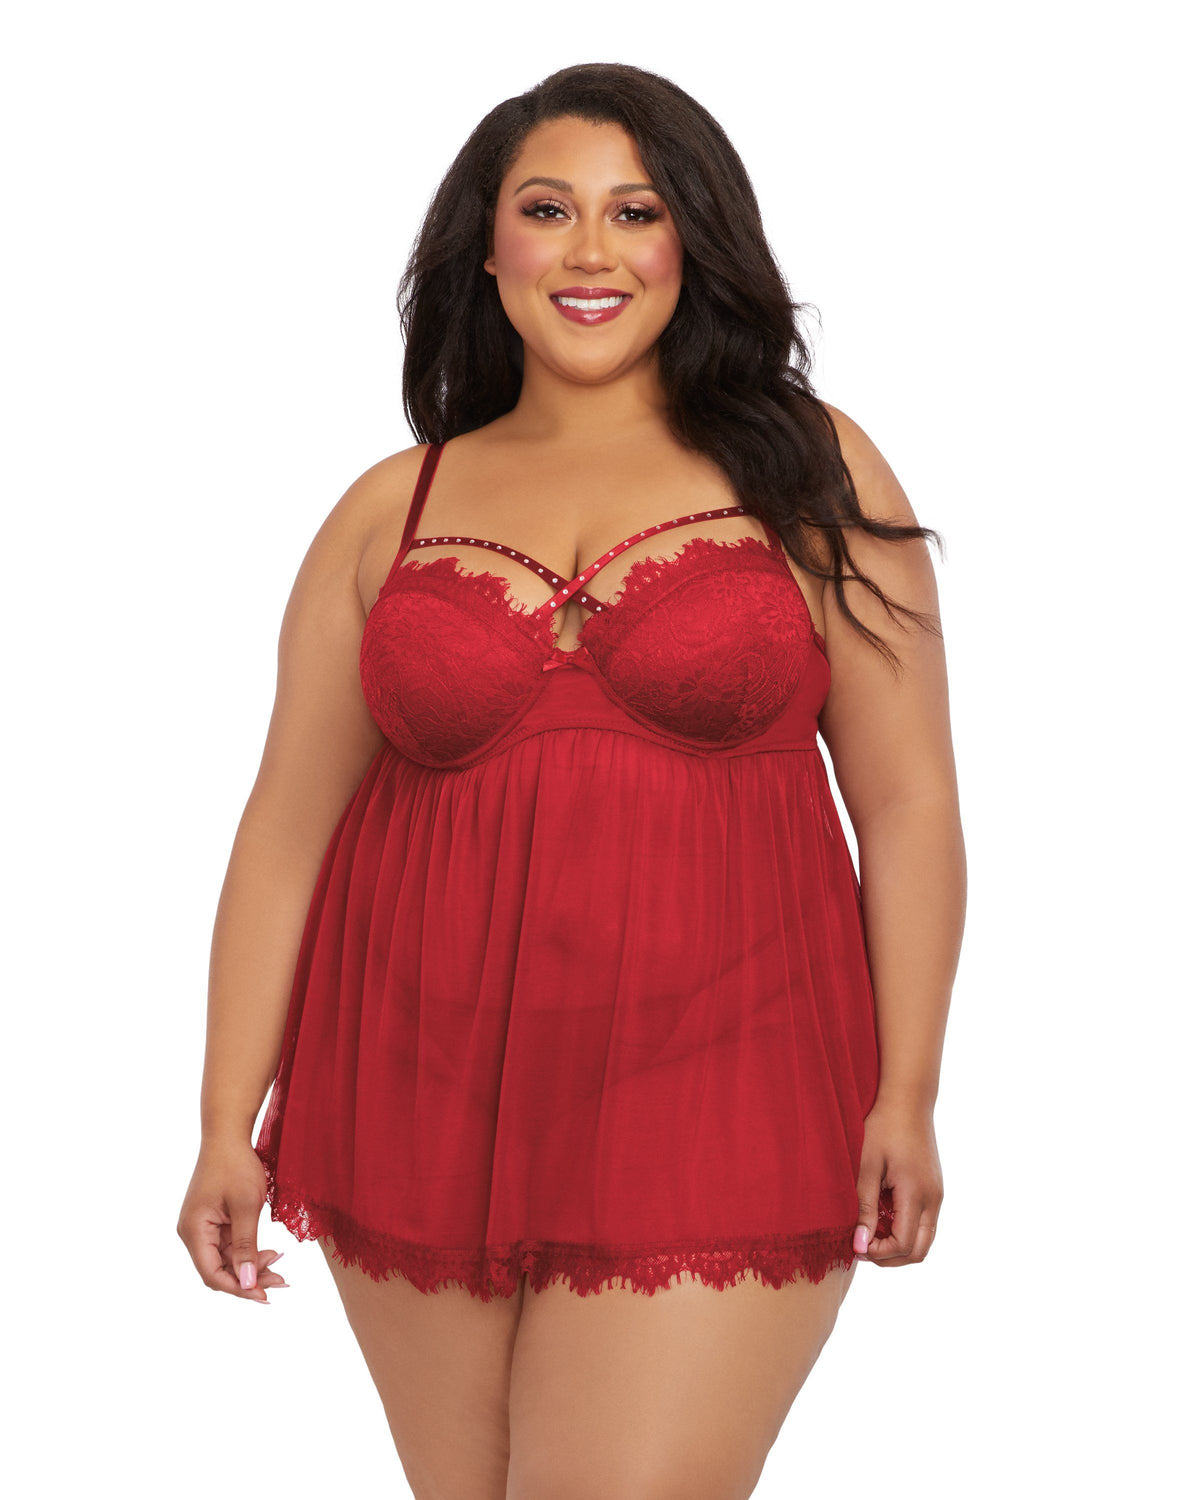 iCollection Roseanne Plus Size Babydoll - HauteFlair